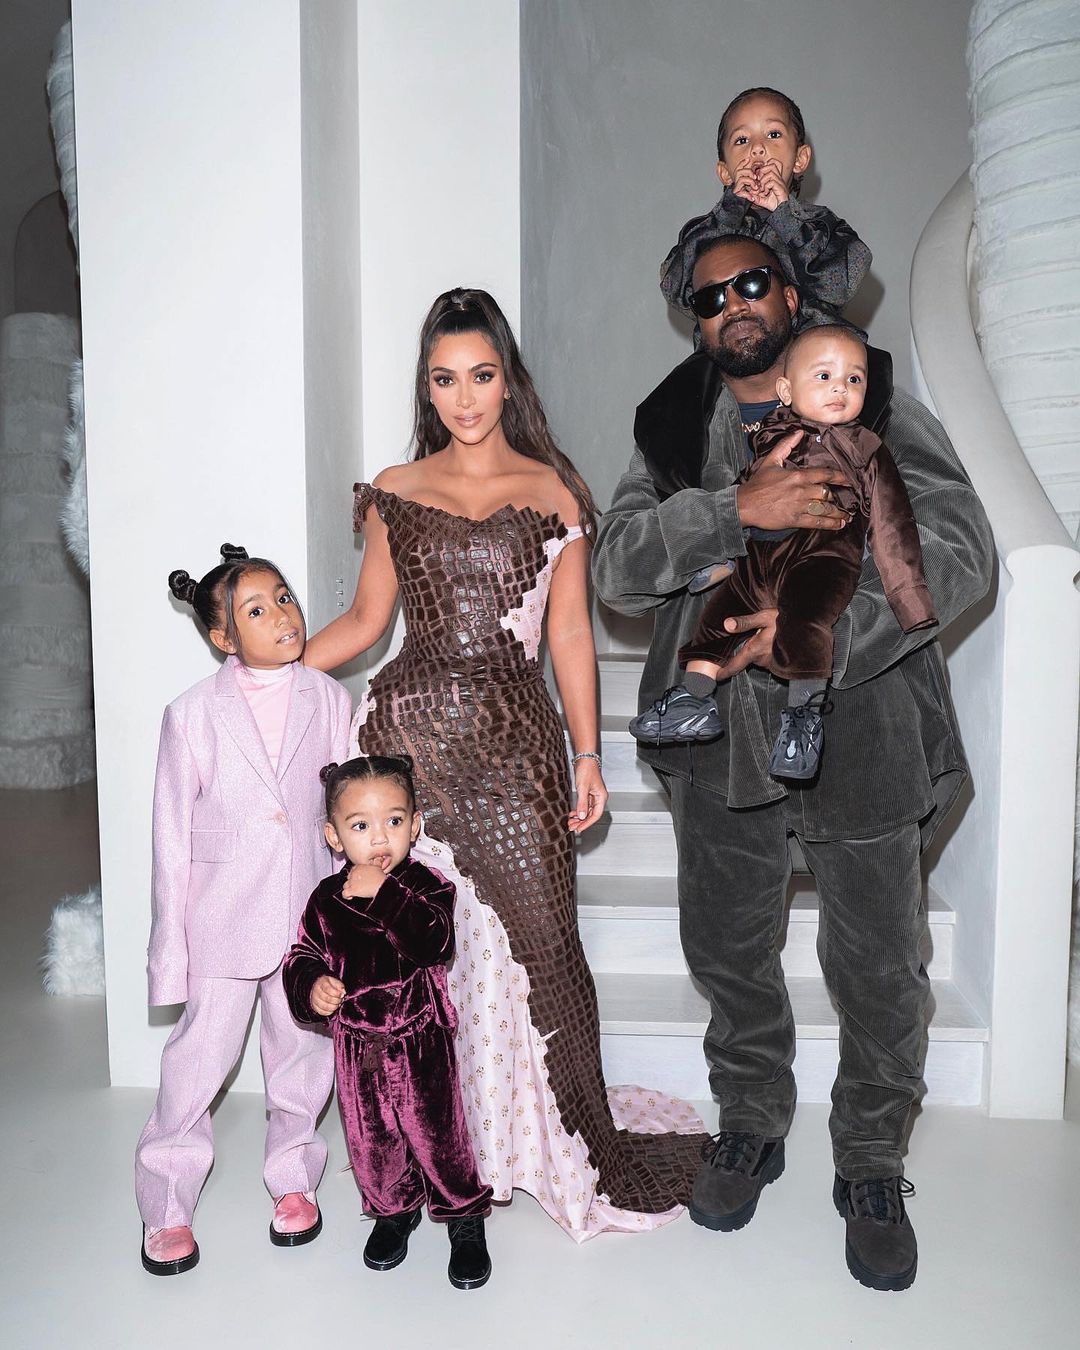 Kim and Kanye West posed with their children in a photo from December 2019